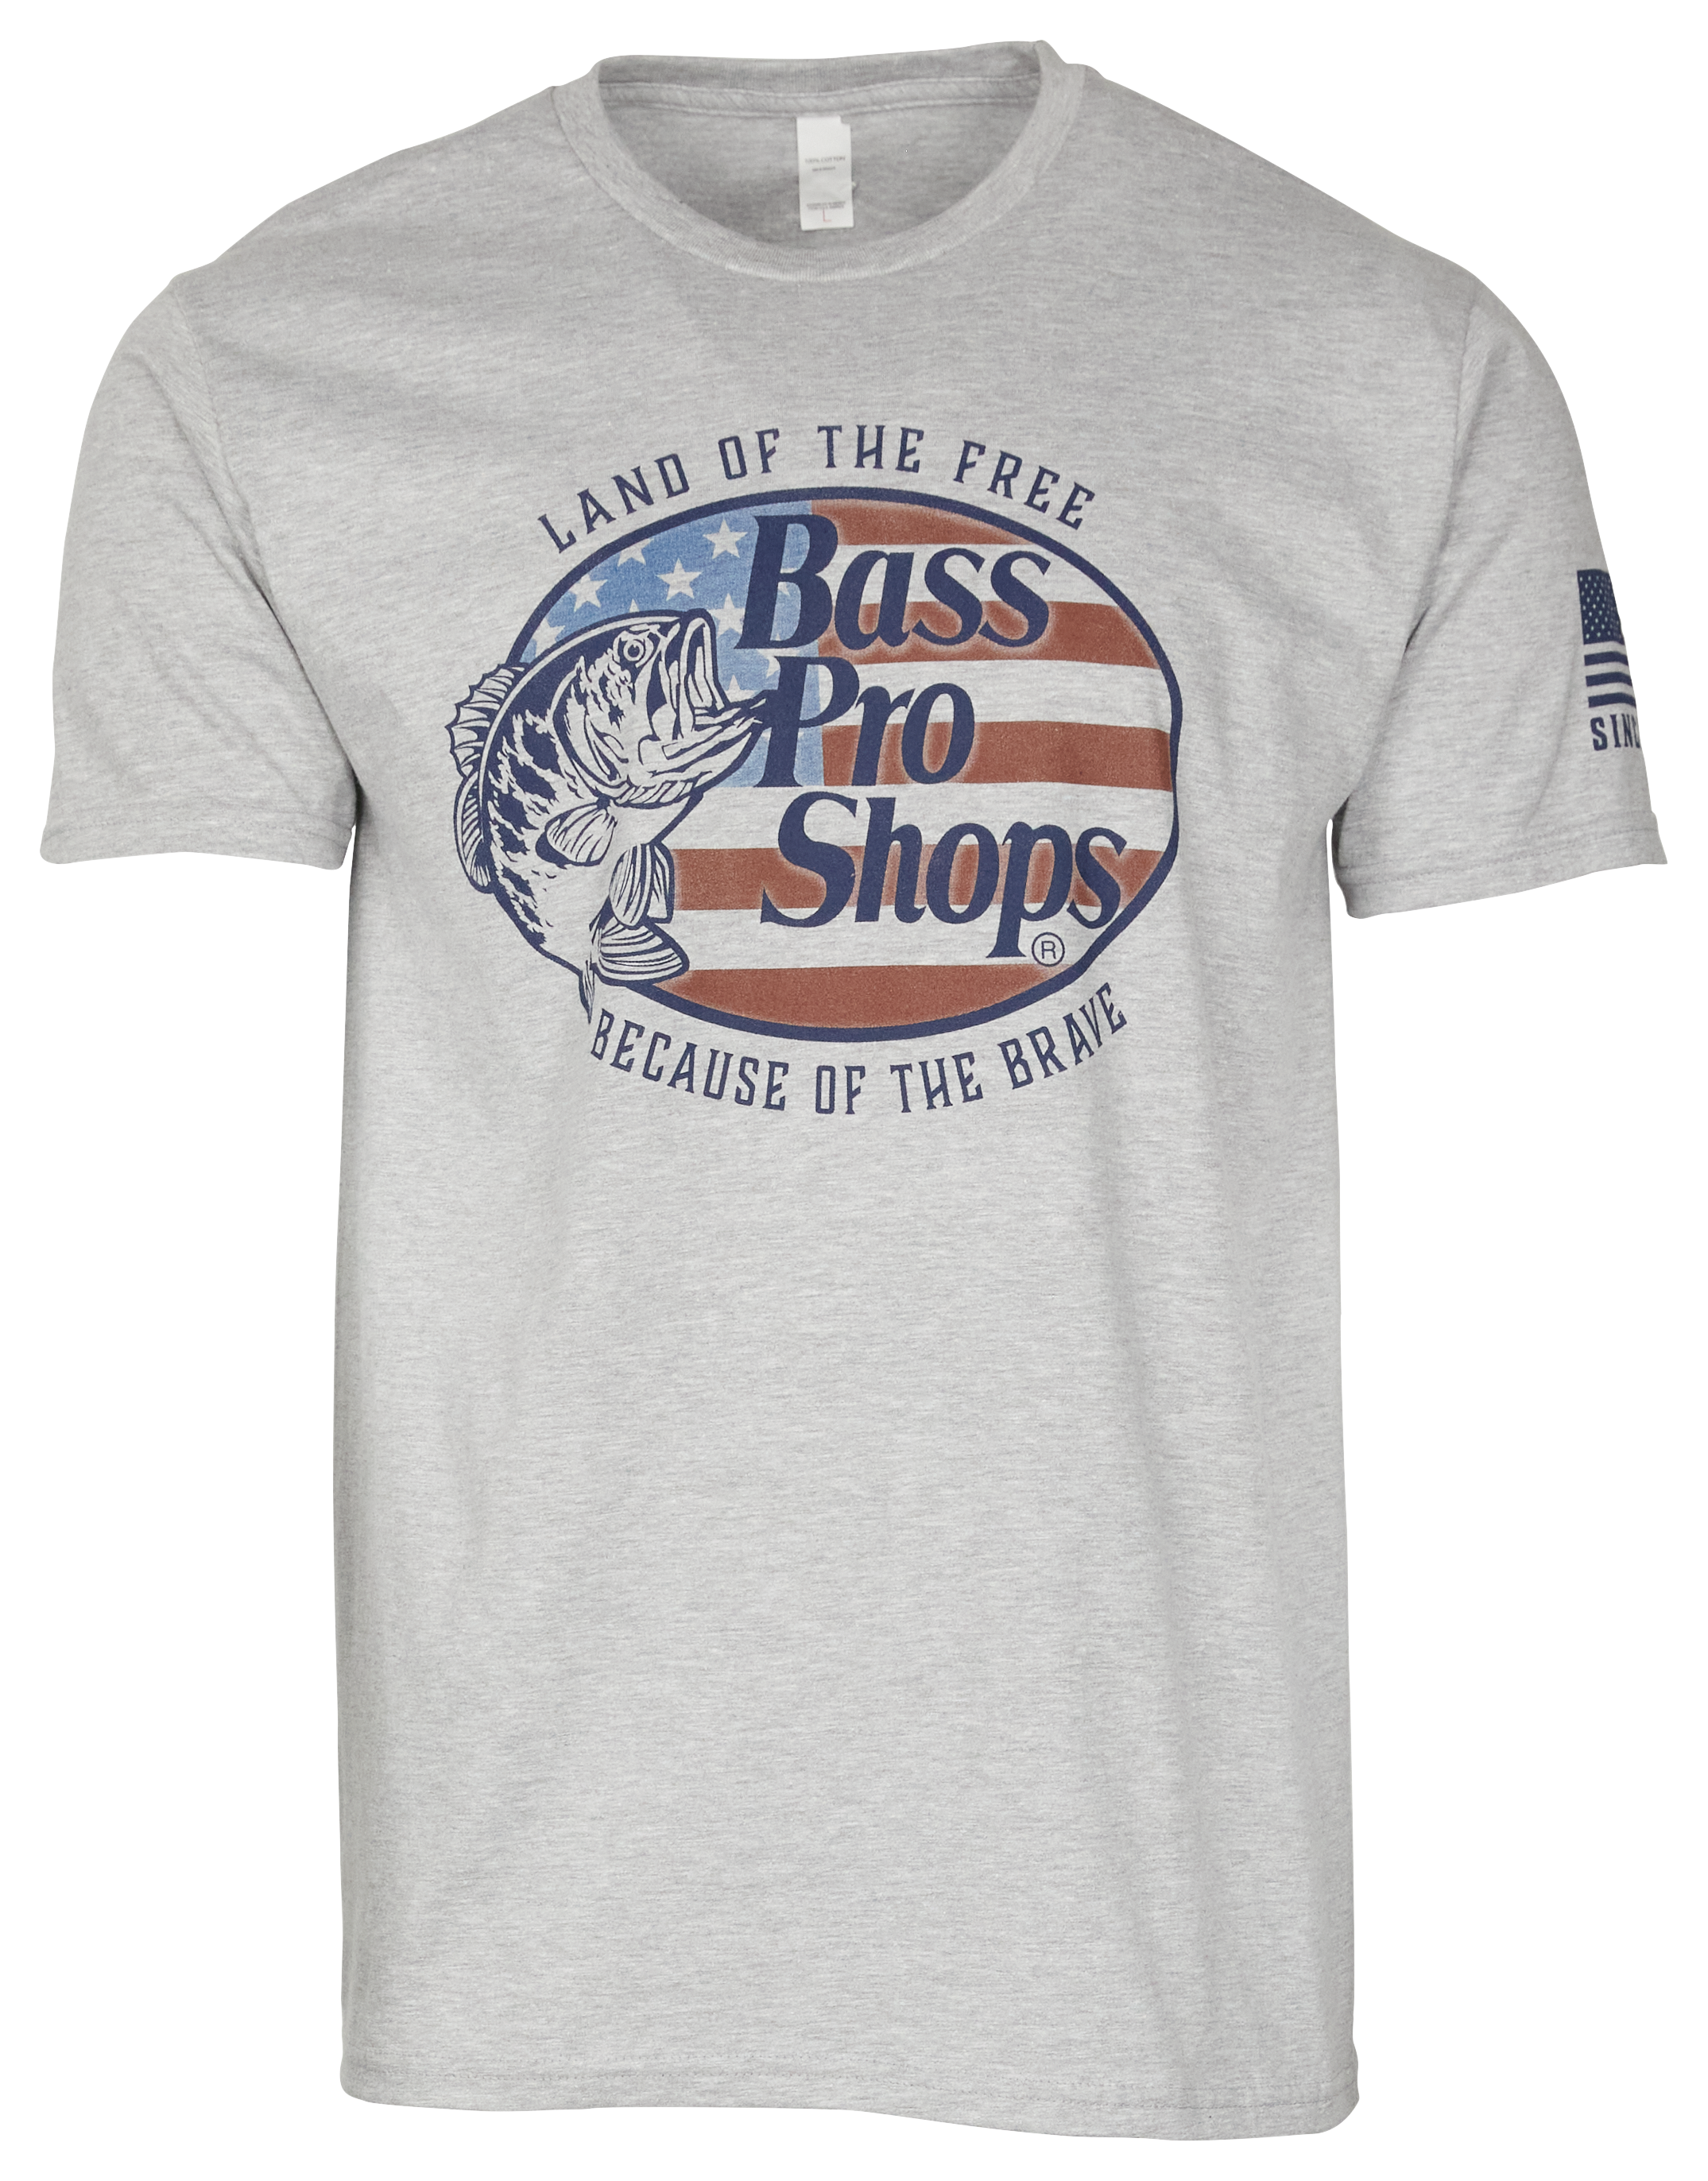 Bass Pro Shops Really Love My Wife Short-Sleeve T-Shirt for Men